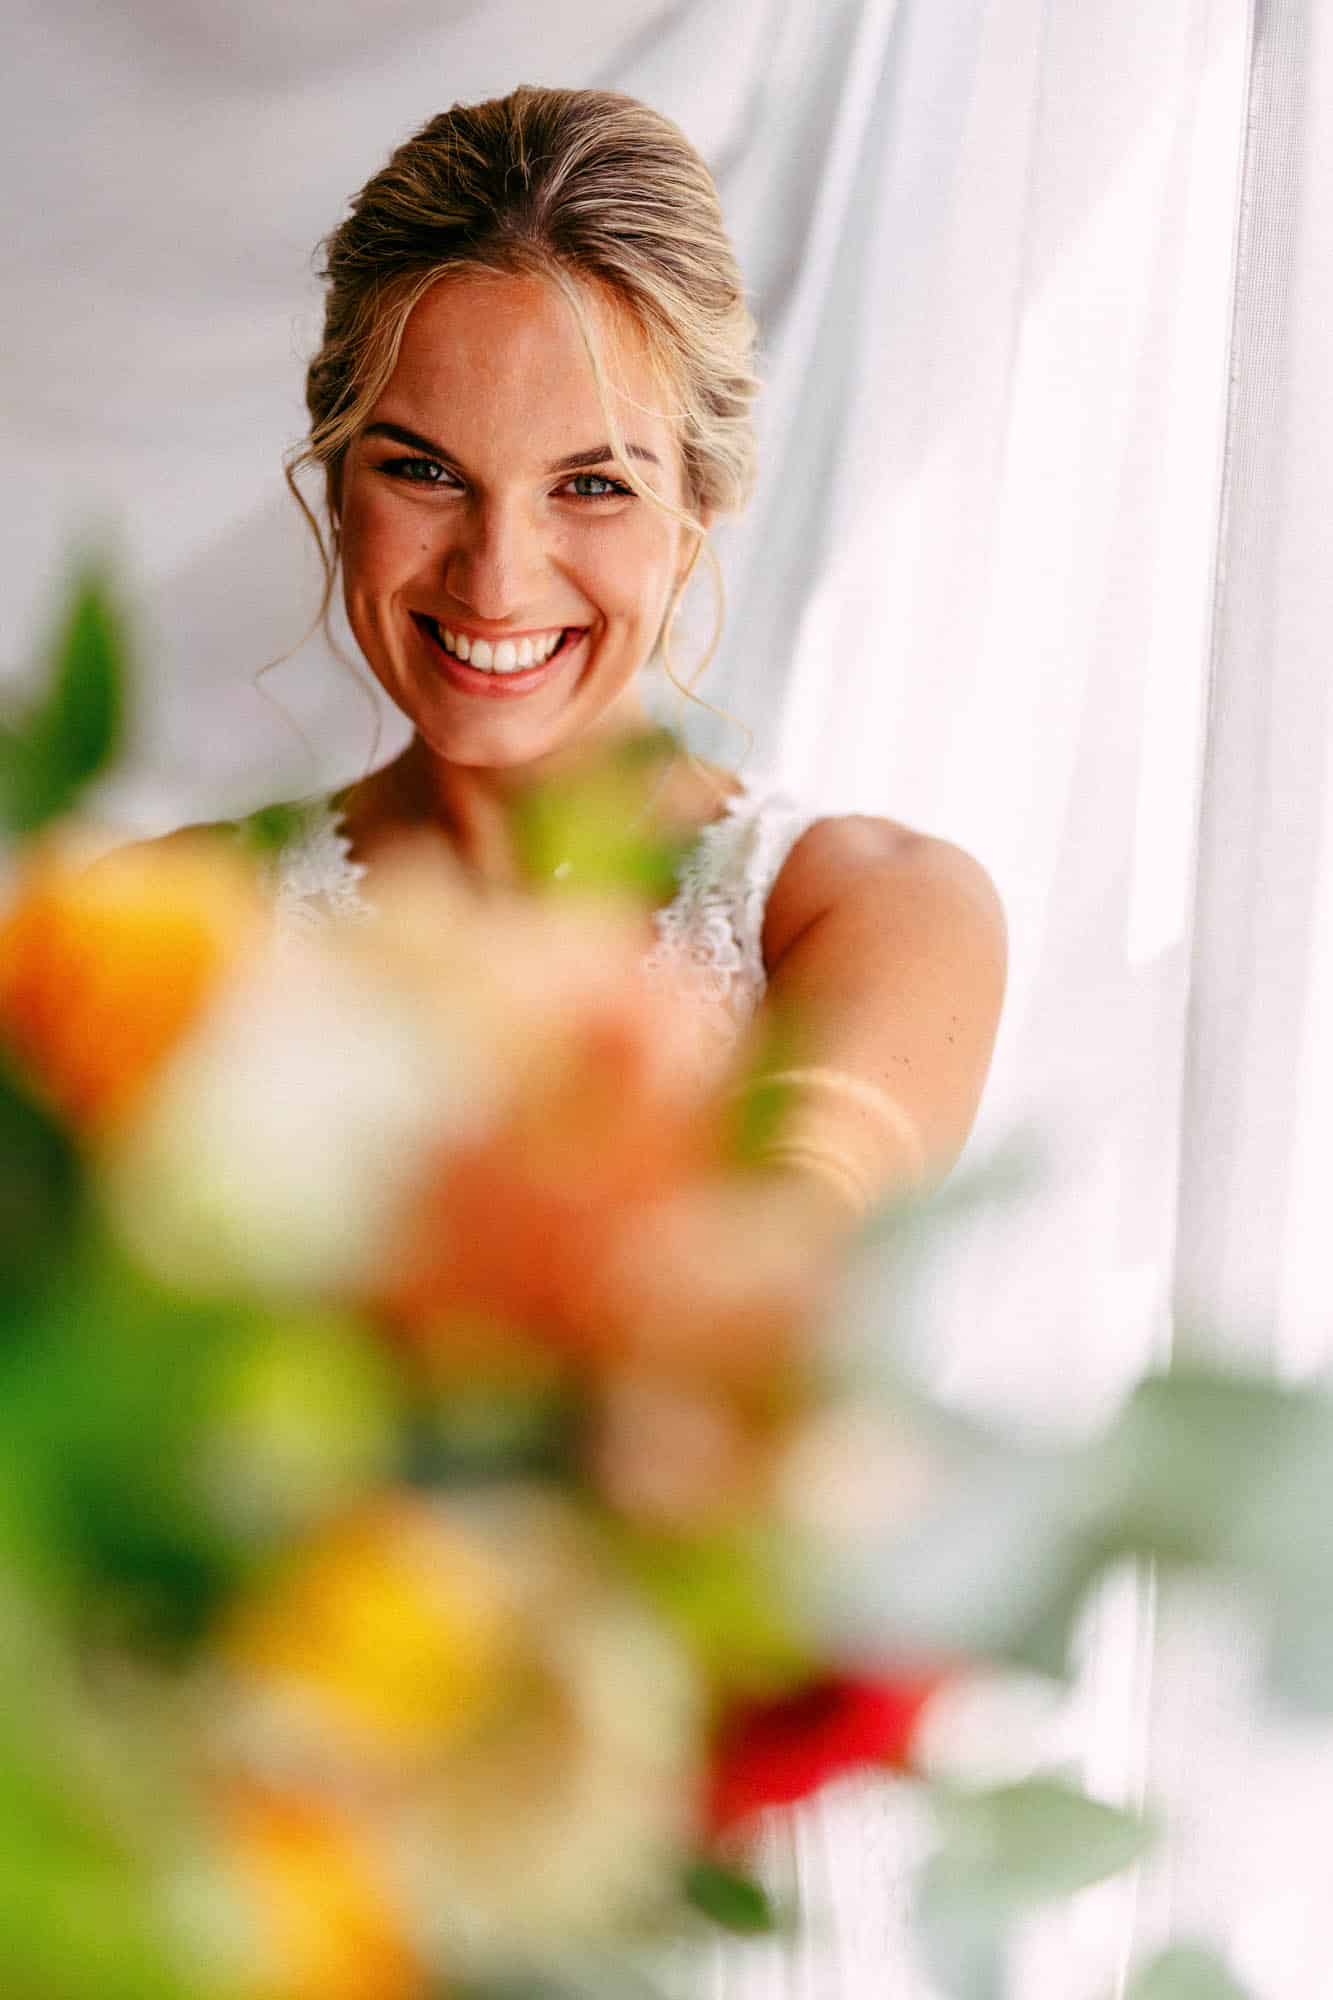 A bride smiles while holding a bouquet of flowers during her bridal shower.